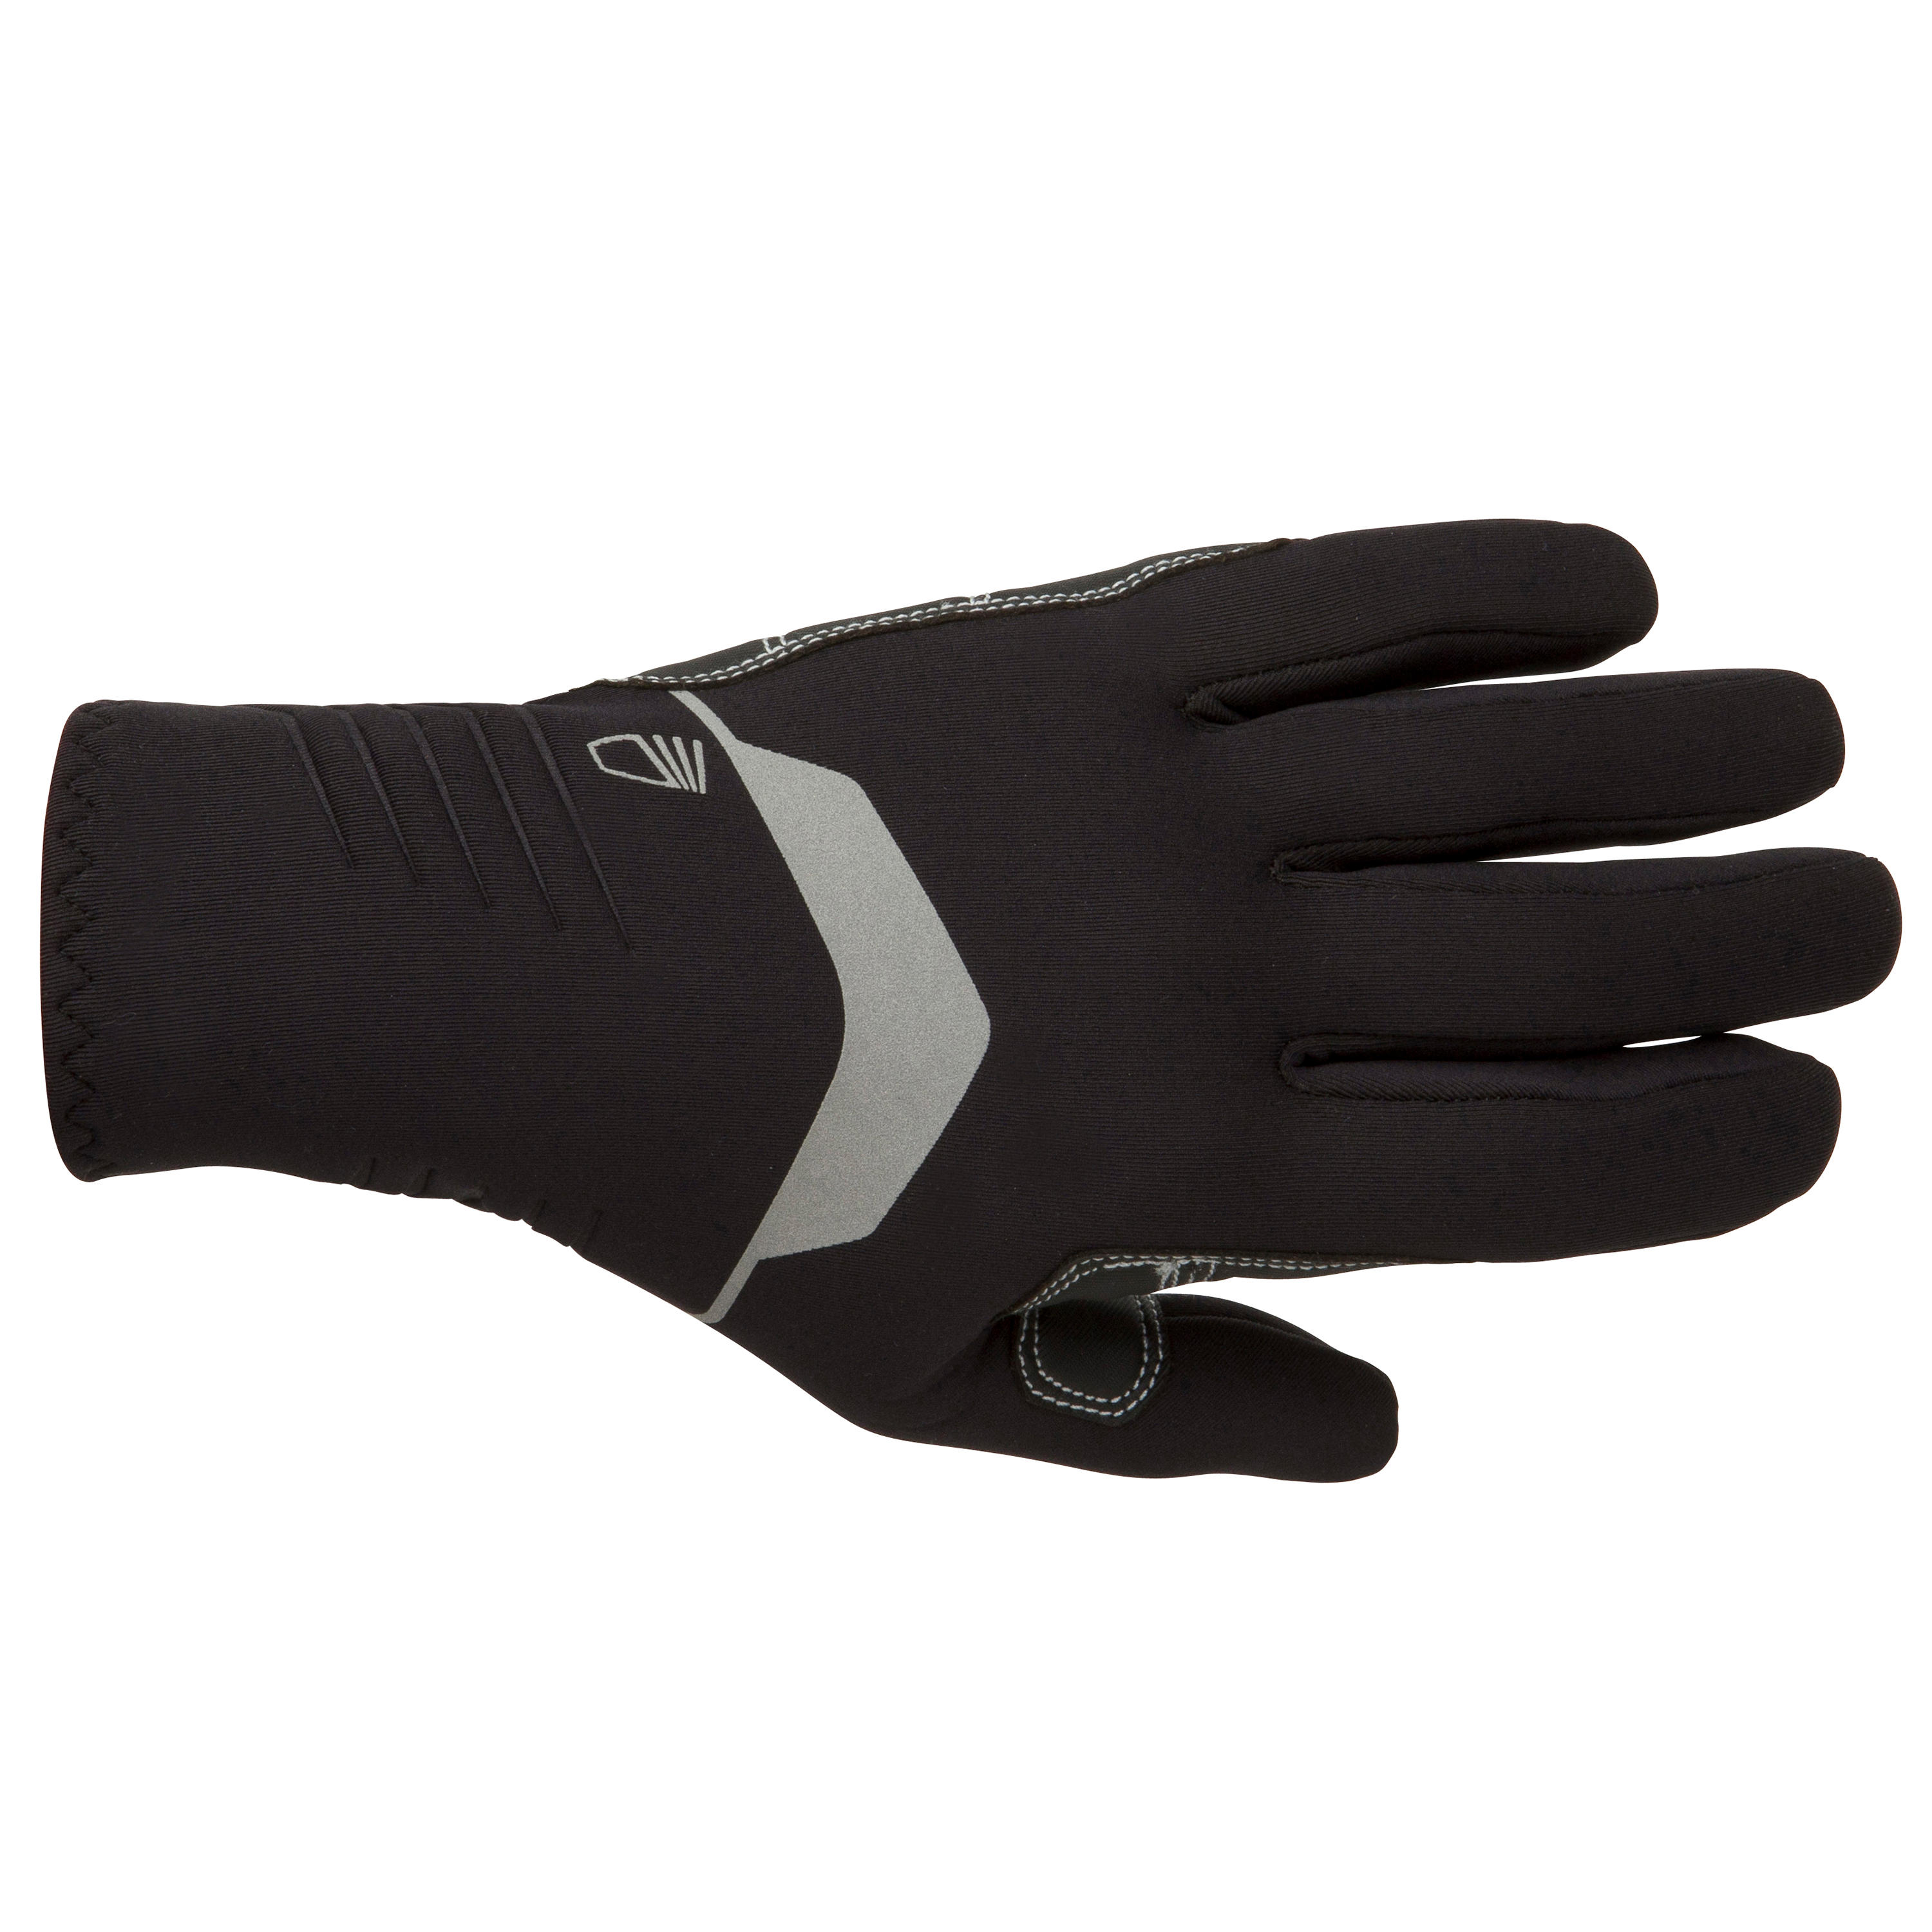 Spearfishing gloves 5mm neoprene with smooth lining BEUCHAT - SIROCCO ELITE  - Decathlon